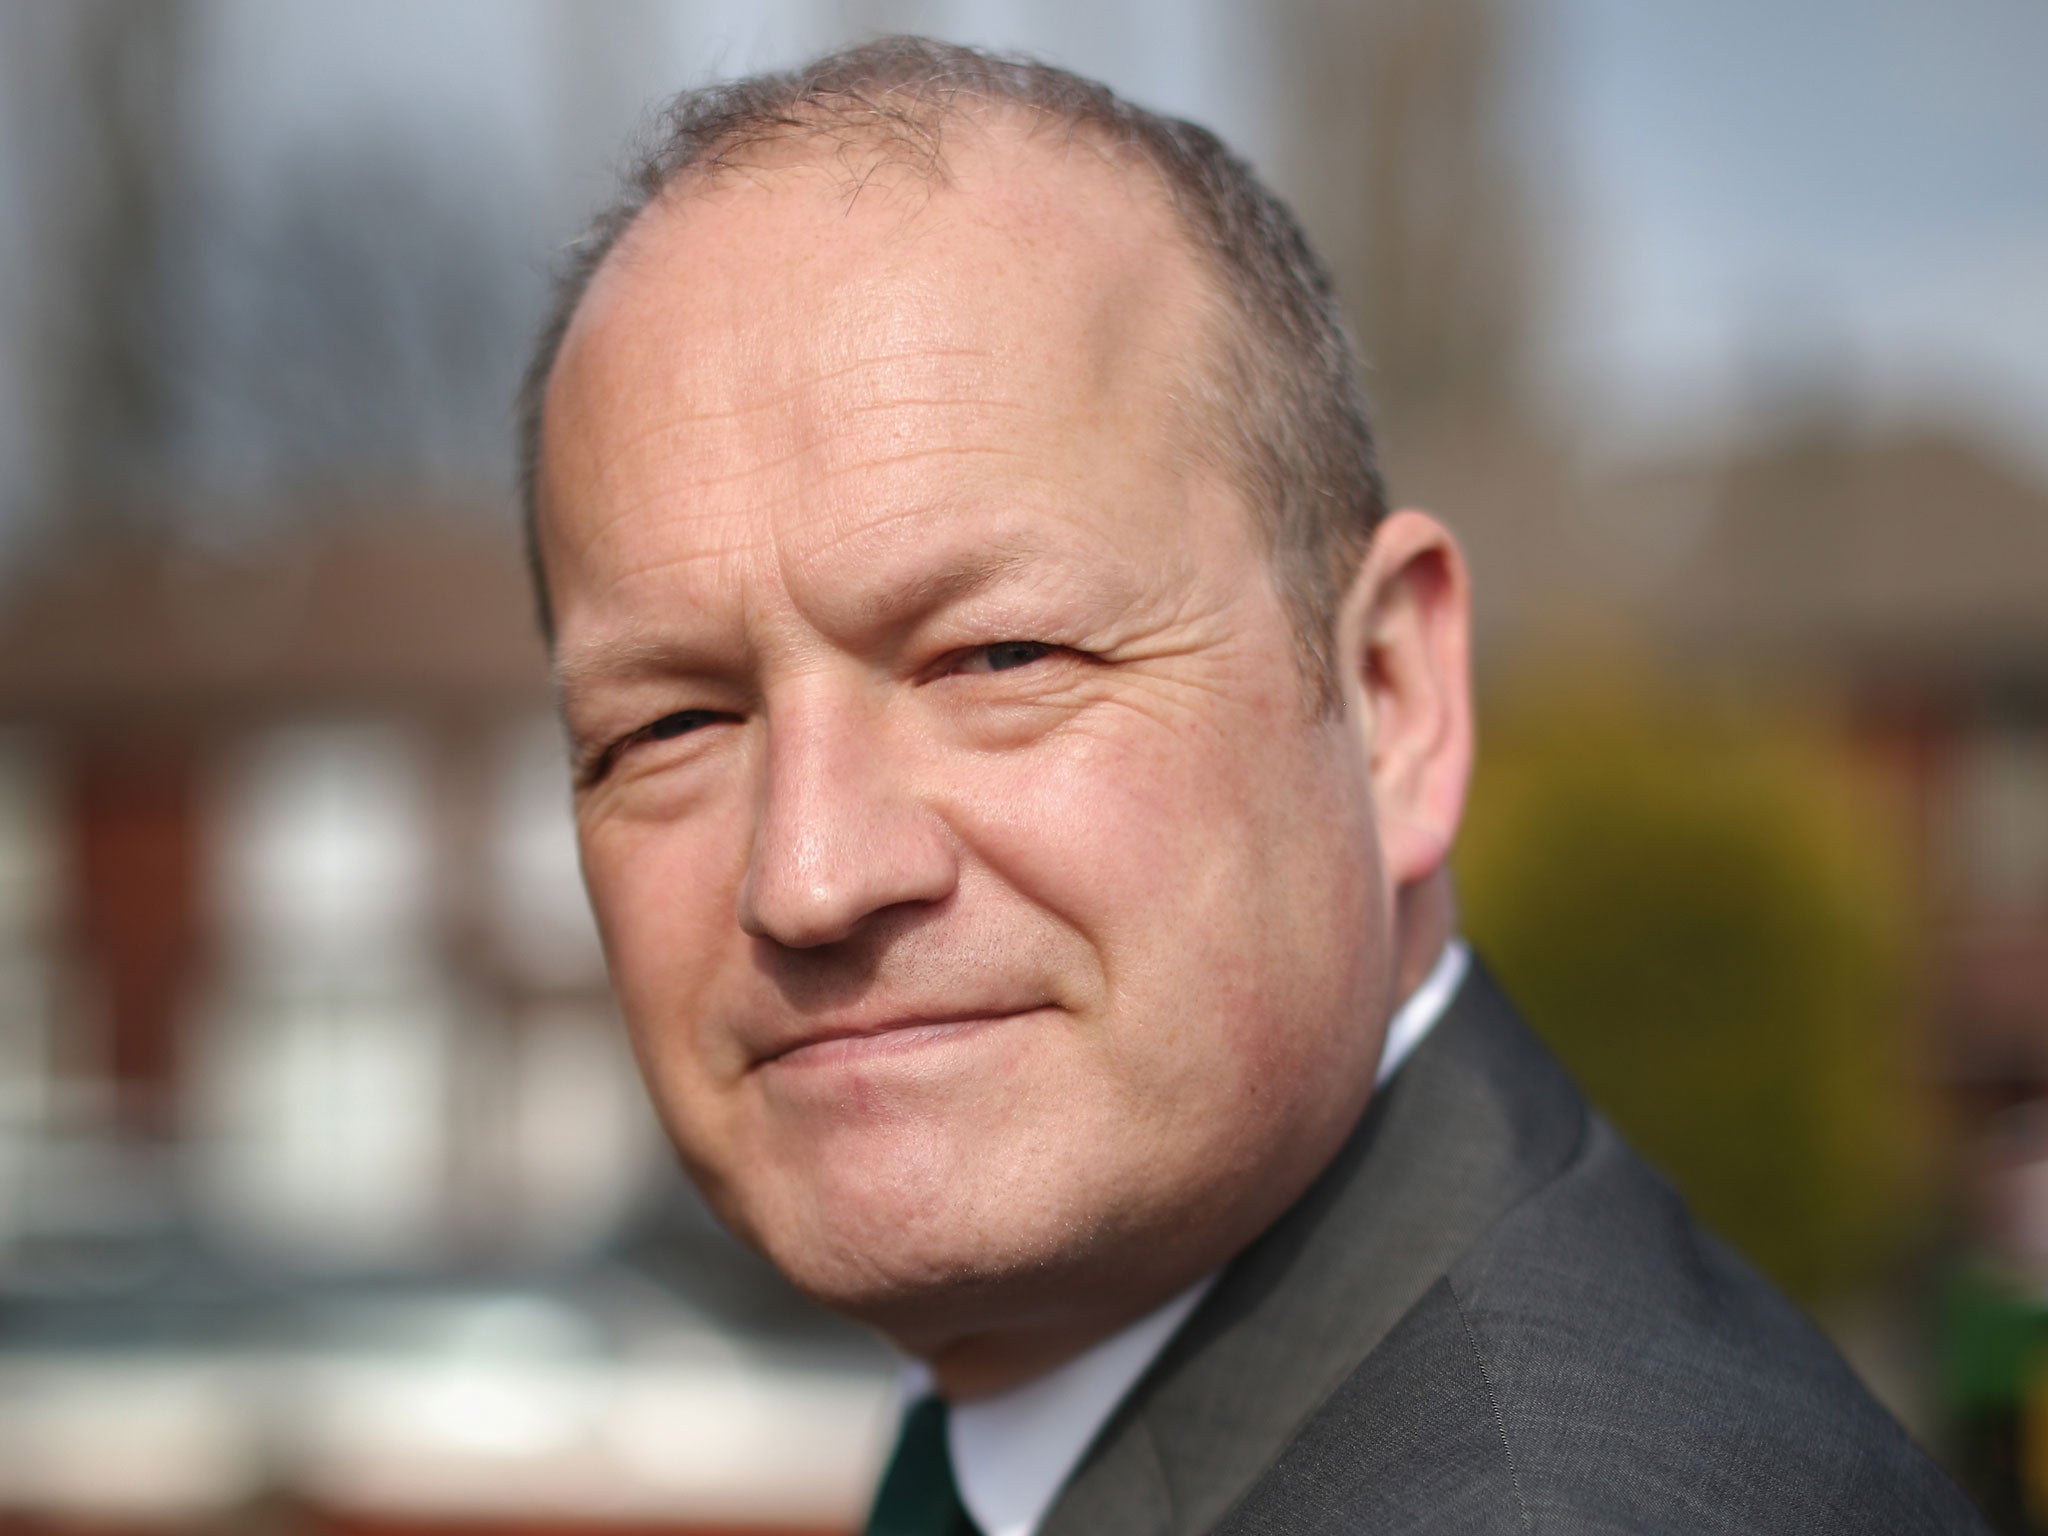 Simon Danczuk told ‘The Sun on Sunday’ he was ‘drunk’ on holiday when he sent the texts